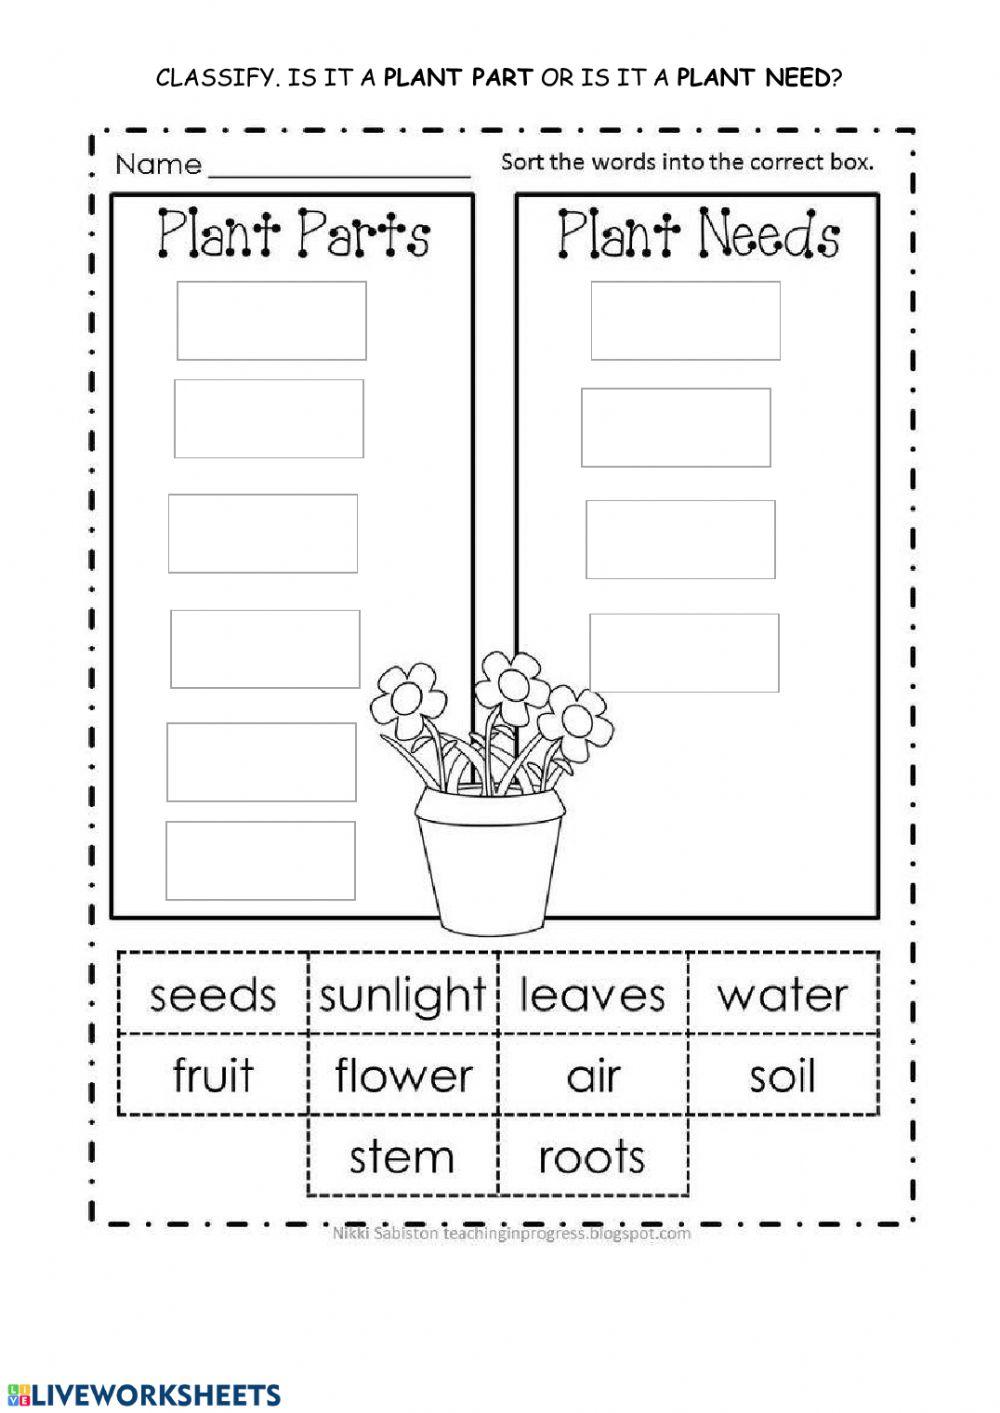 Plant parts and plant needs